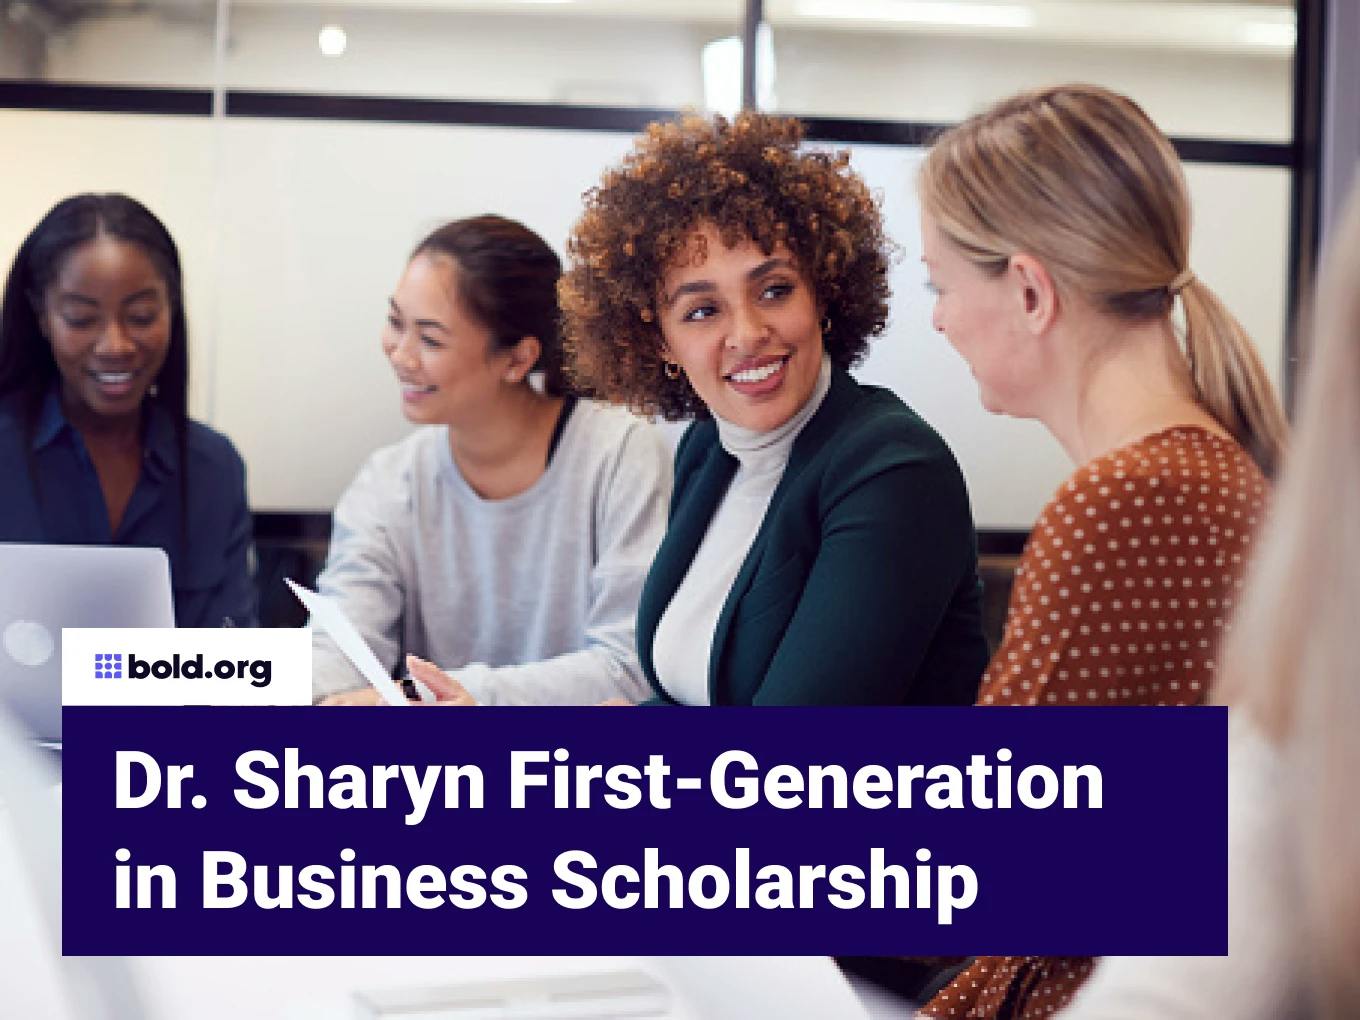 Dr. Sharyn First-Generation in Business Scholarship